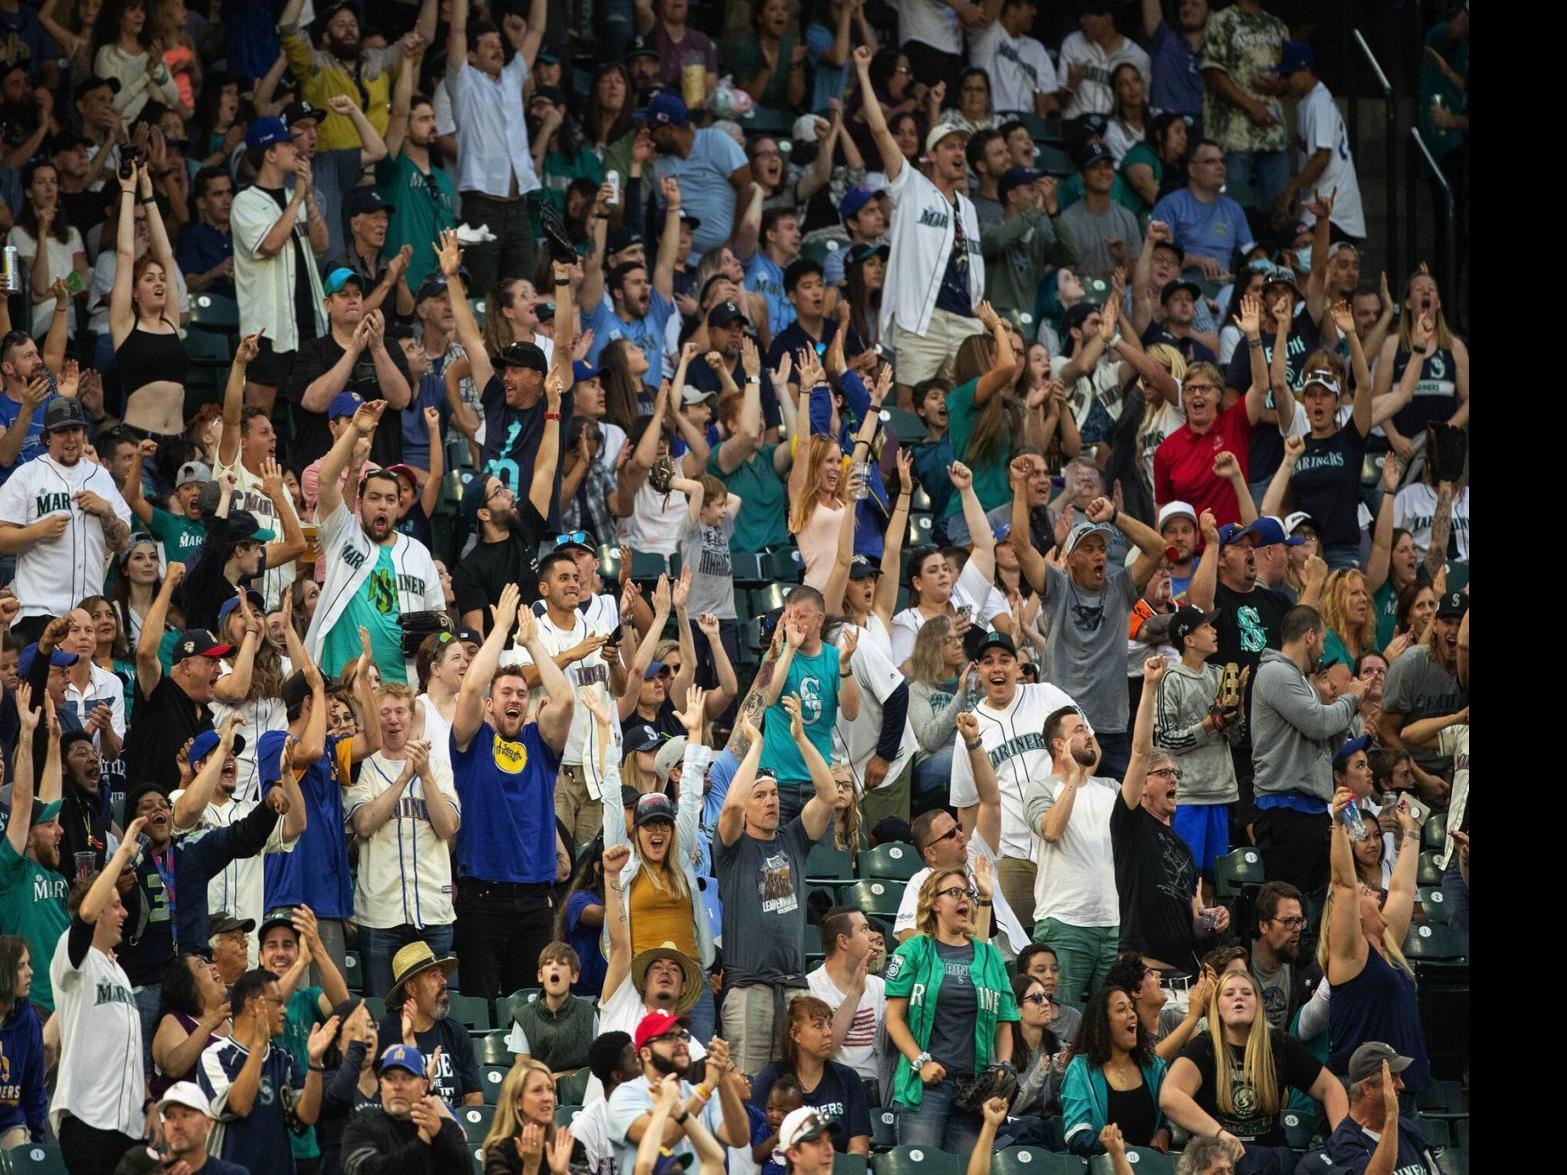 For young Mariners fans, playoffs are a mystery, Mariners